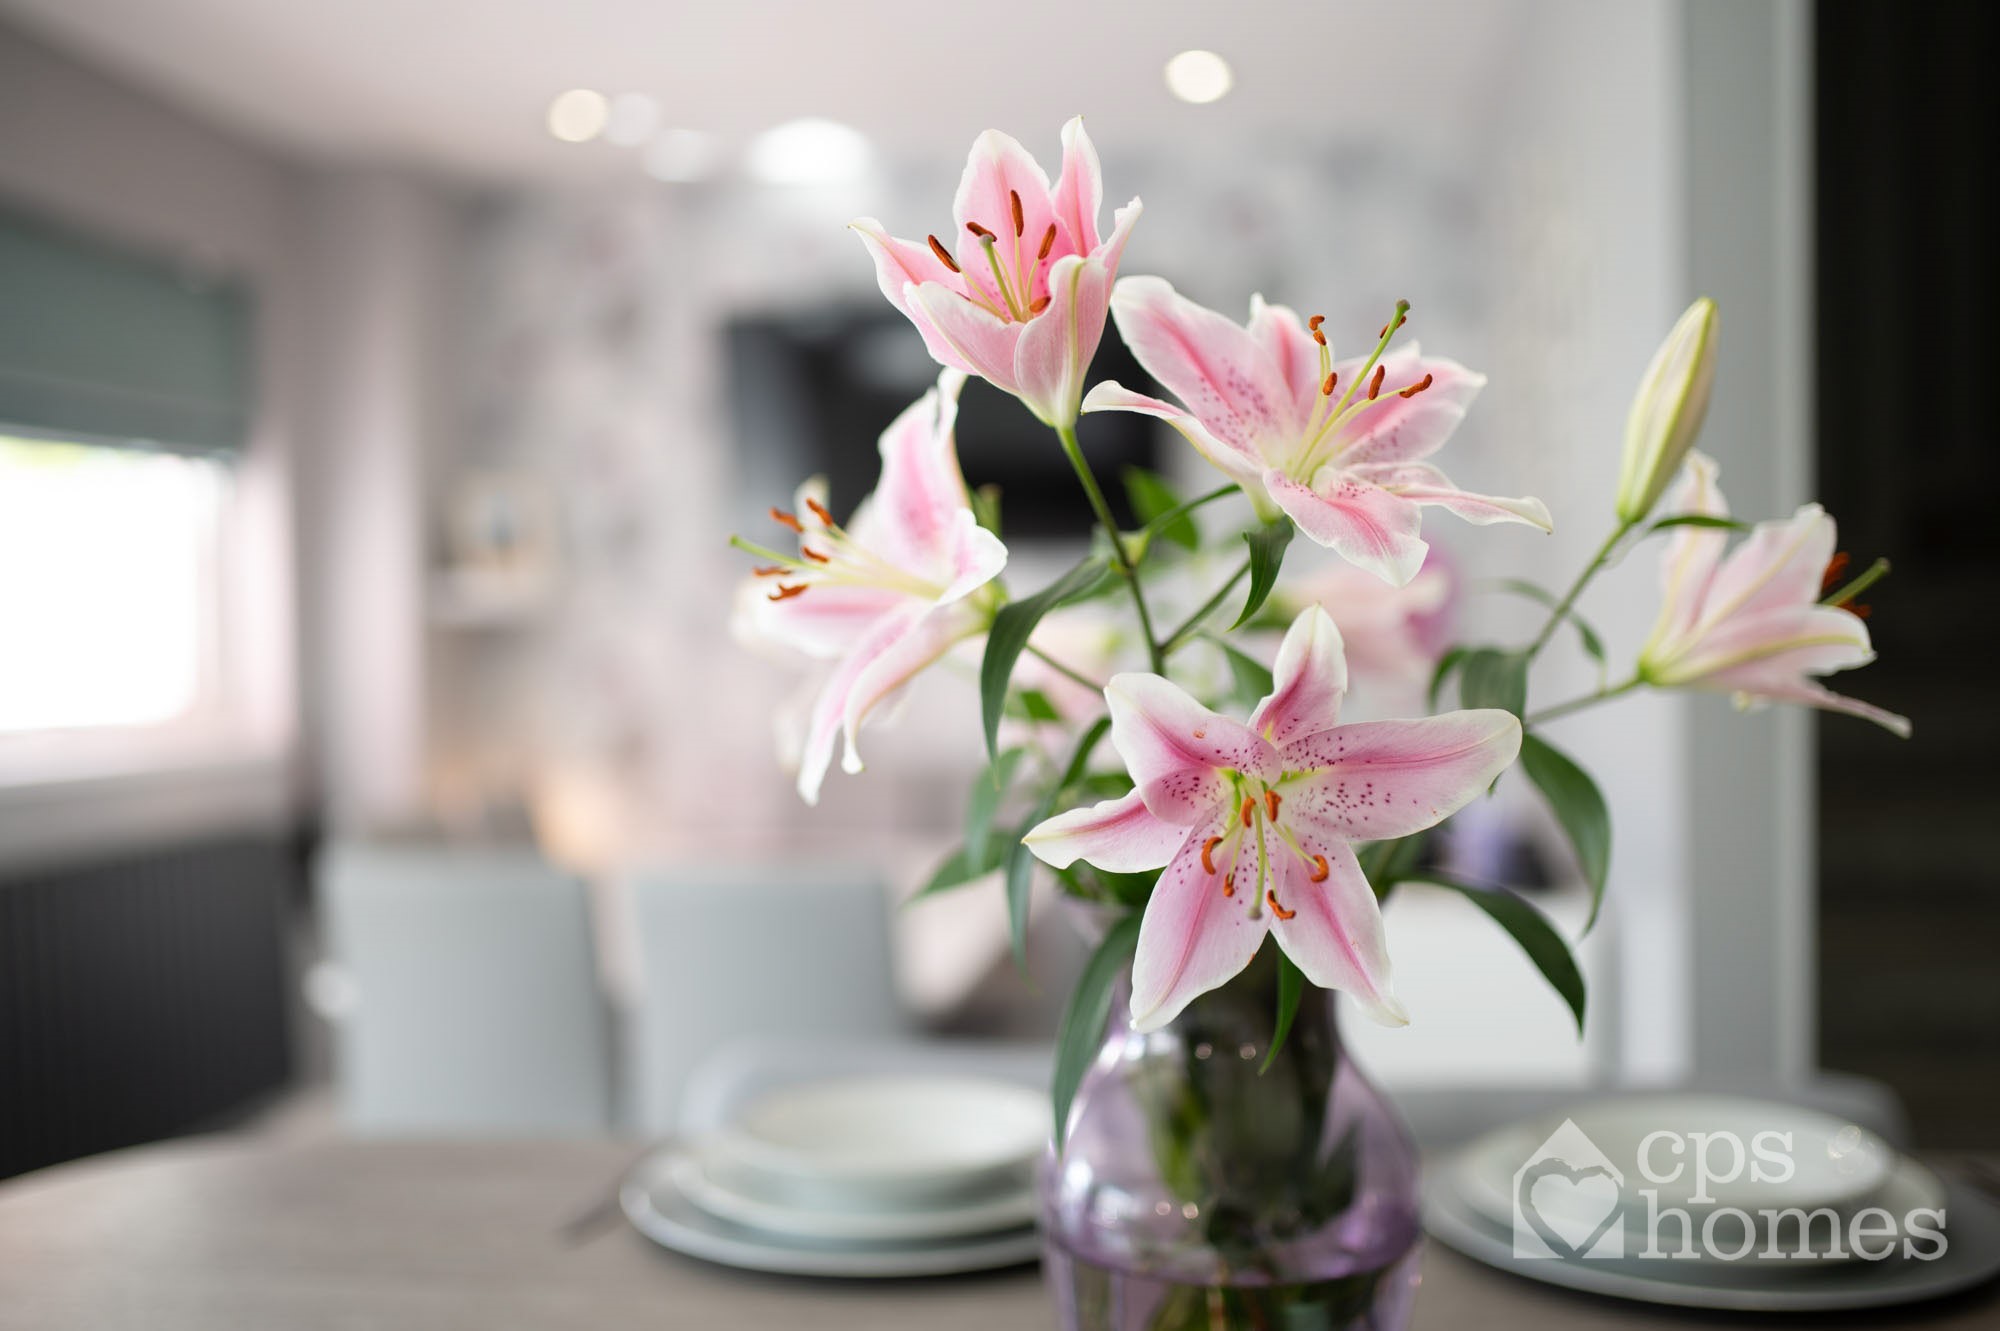 Lilies on dining table